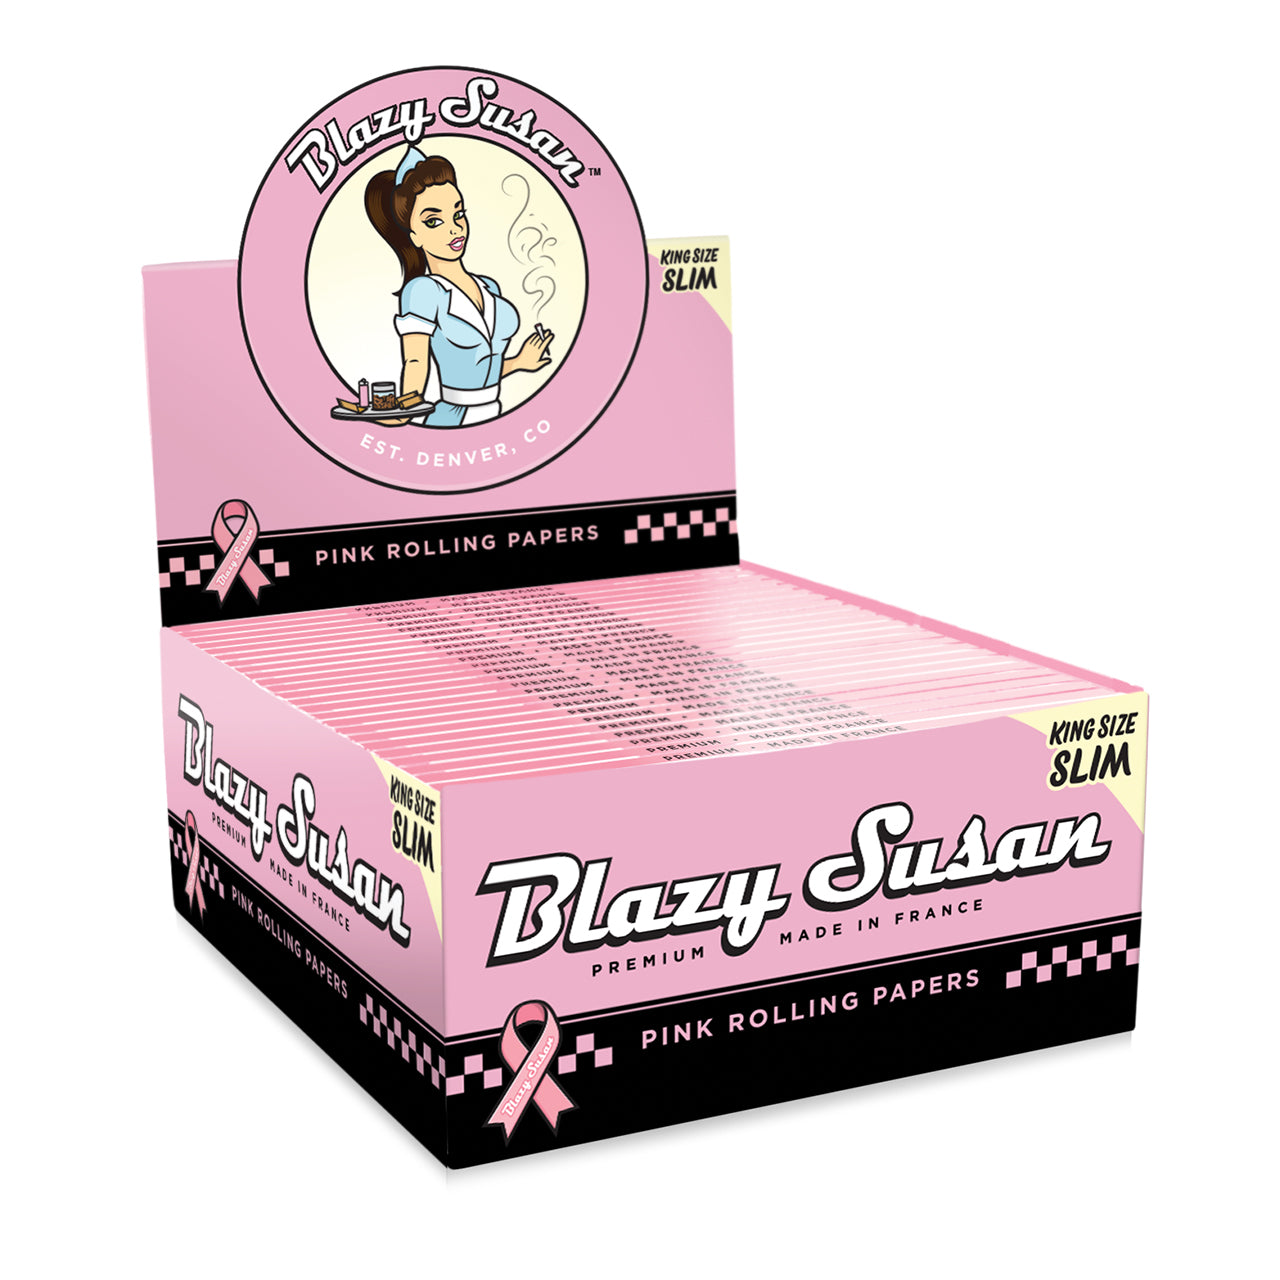 blazy susan pink rolling papers king size box